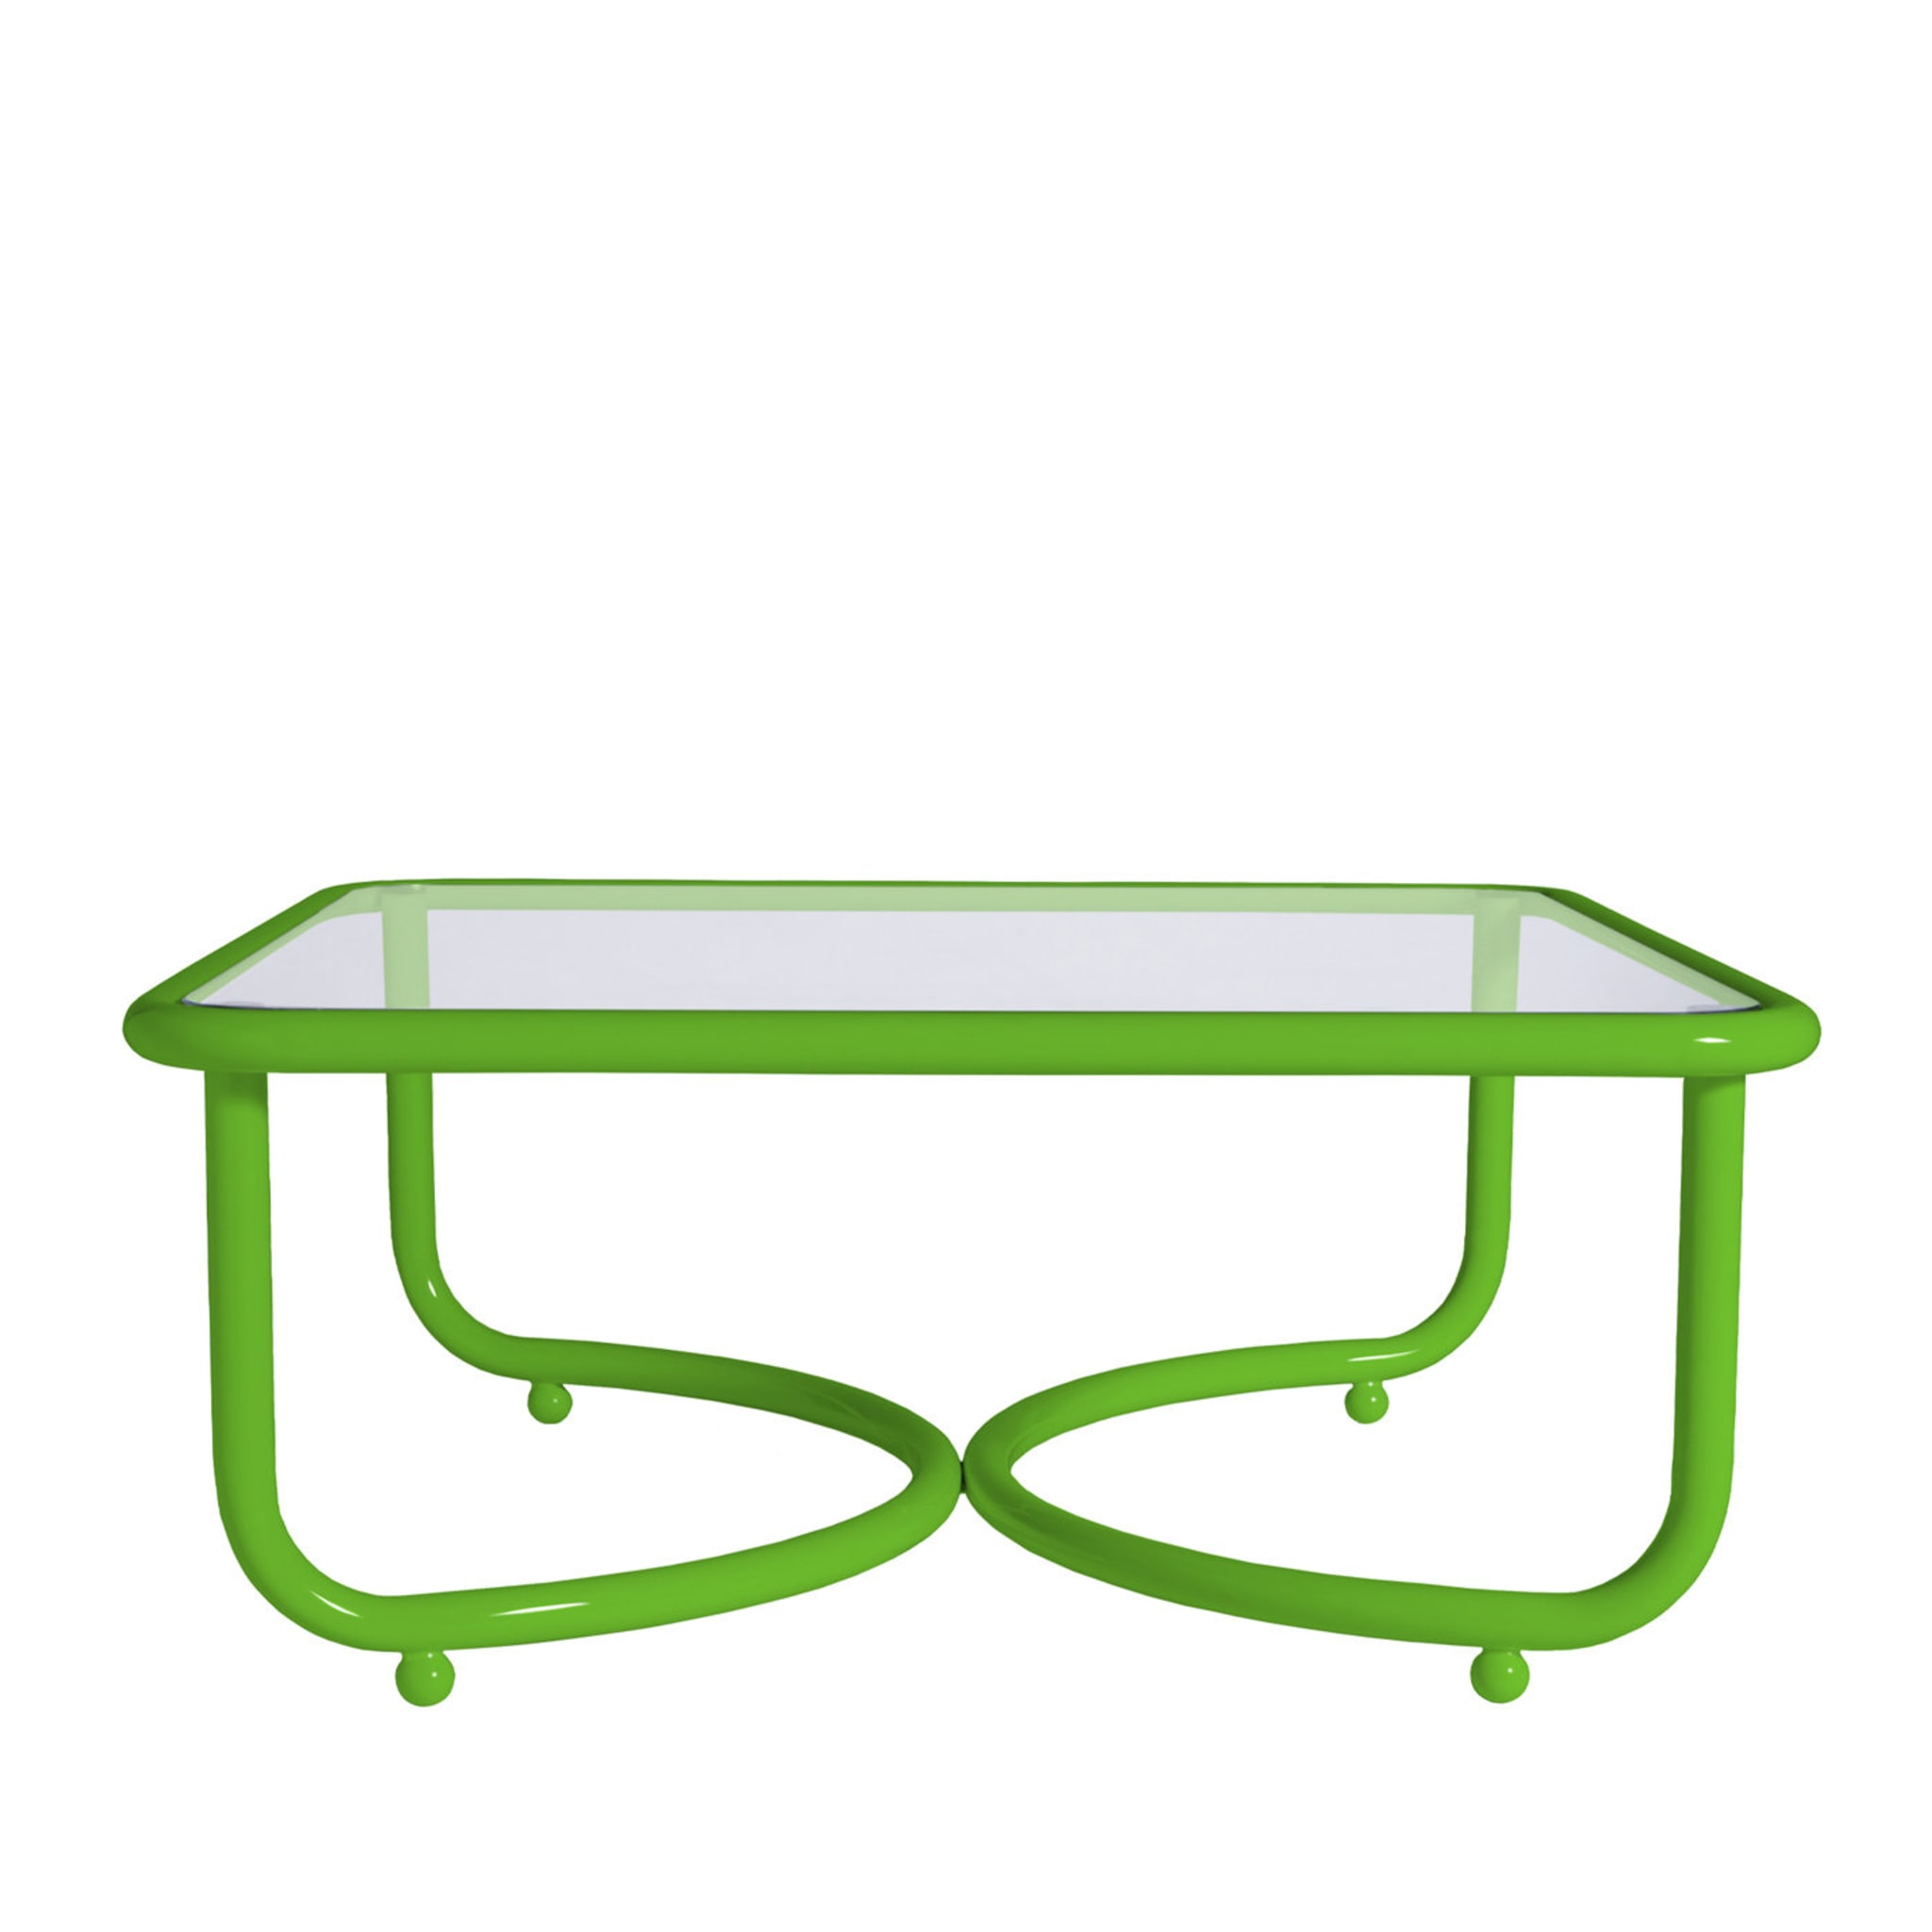 Locus Solus Green Low Table by Gae Aulenti - Main view